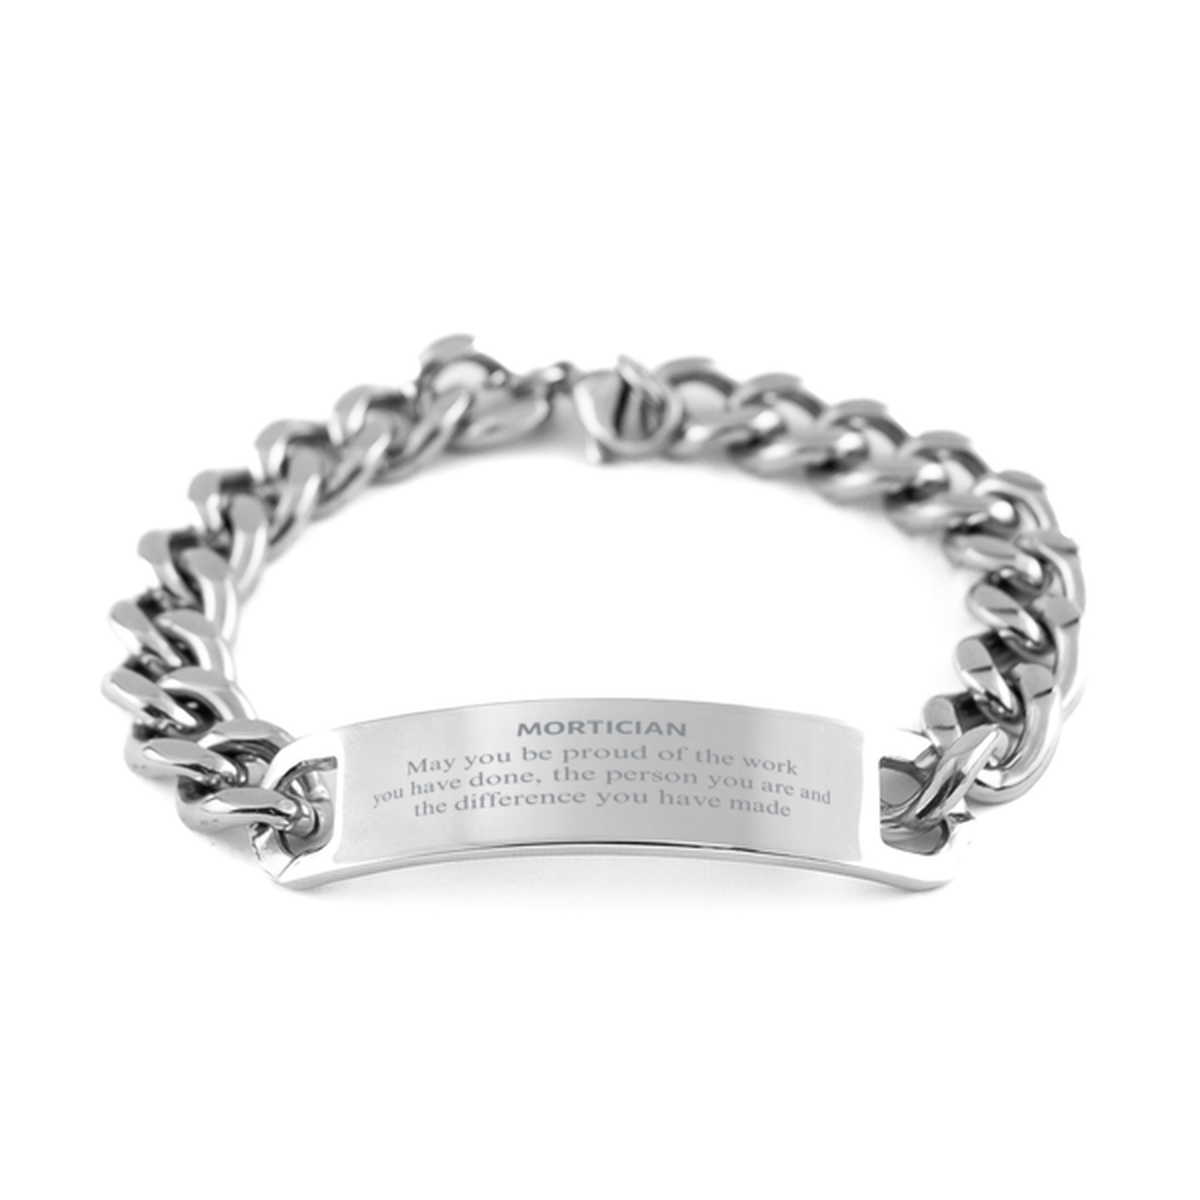 Mortician May you be proud of the work you have done, Retirement Mortician Cuban Chain Stainless Steel Bracelet for Colleague Appreciation Gifts Amazing for Mortician